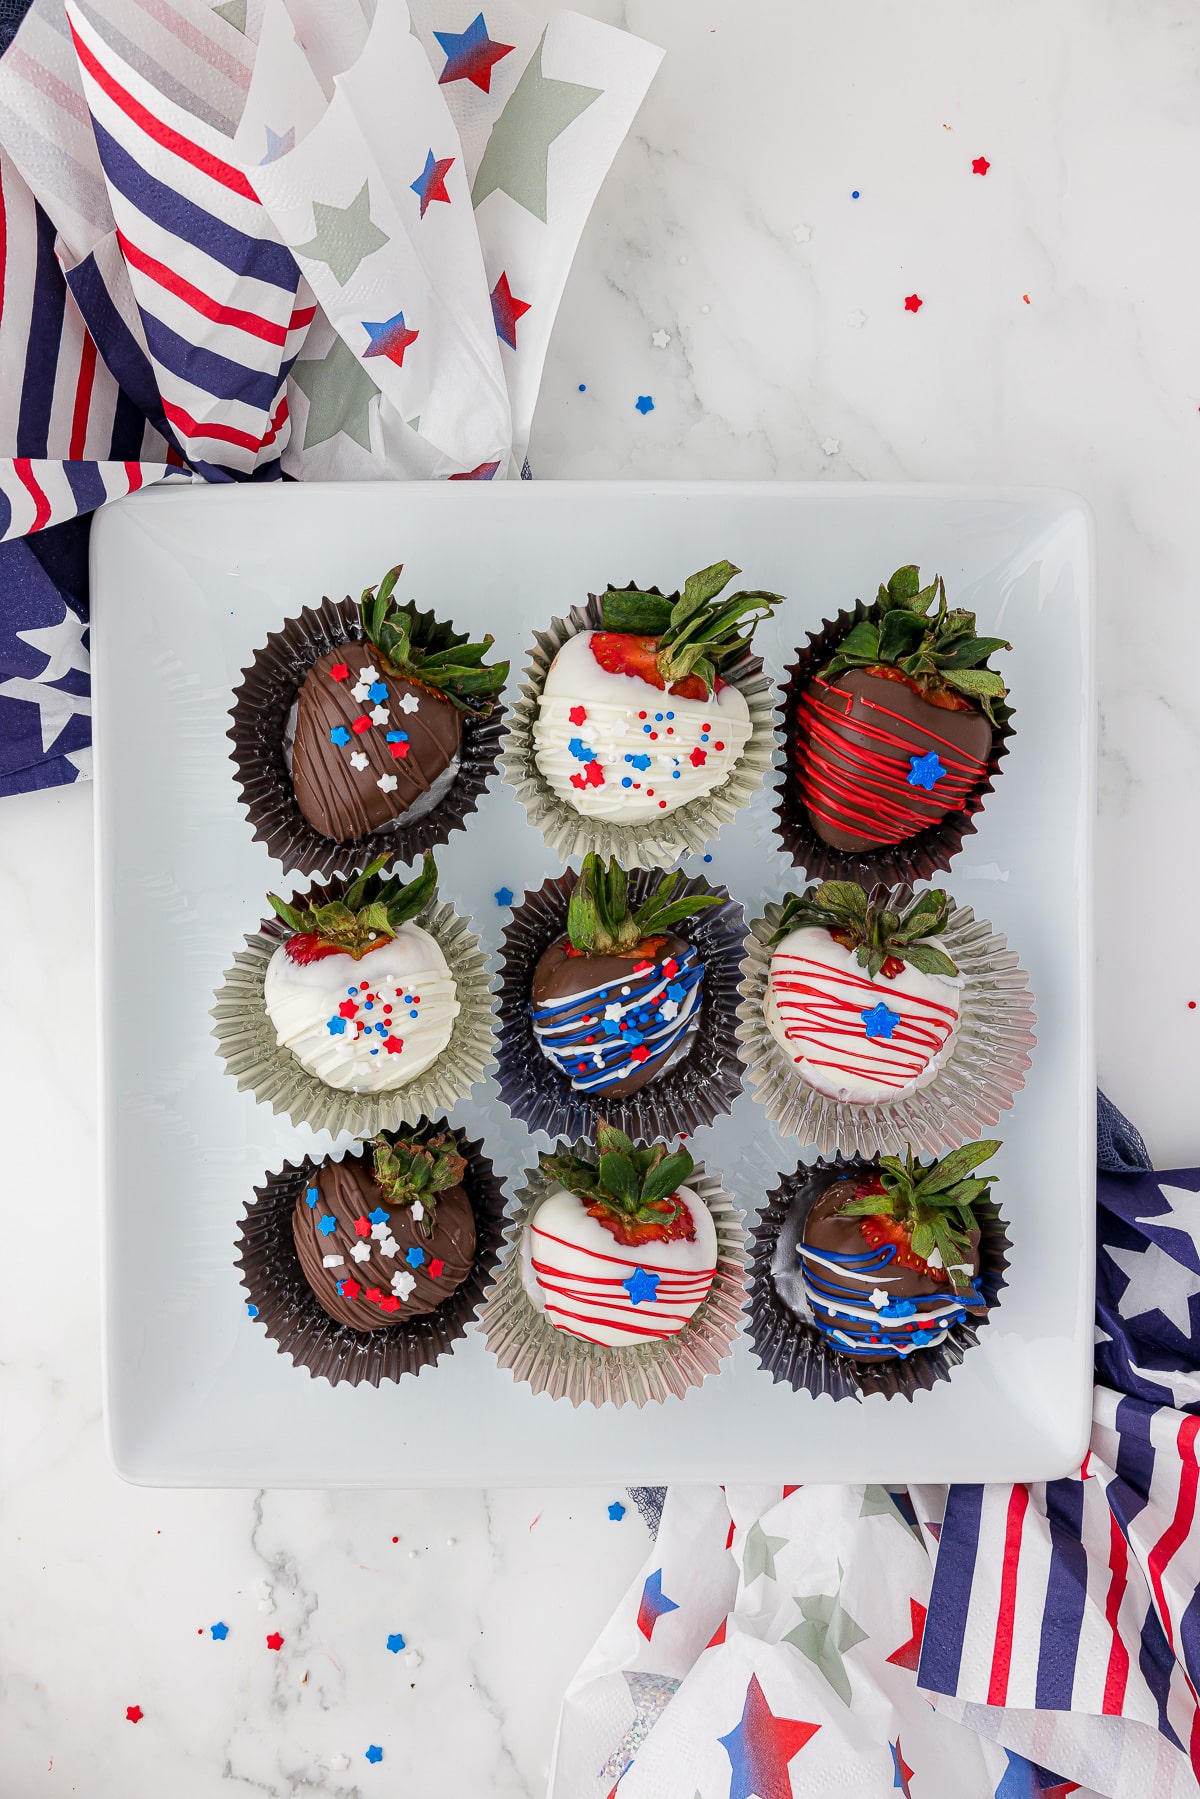 9 chocolate covered strawberries decorated with red, white and blue candies and stripes, plated on a square white dish, surrounded by red, white and blue napkins